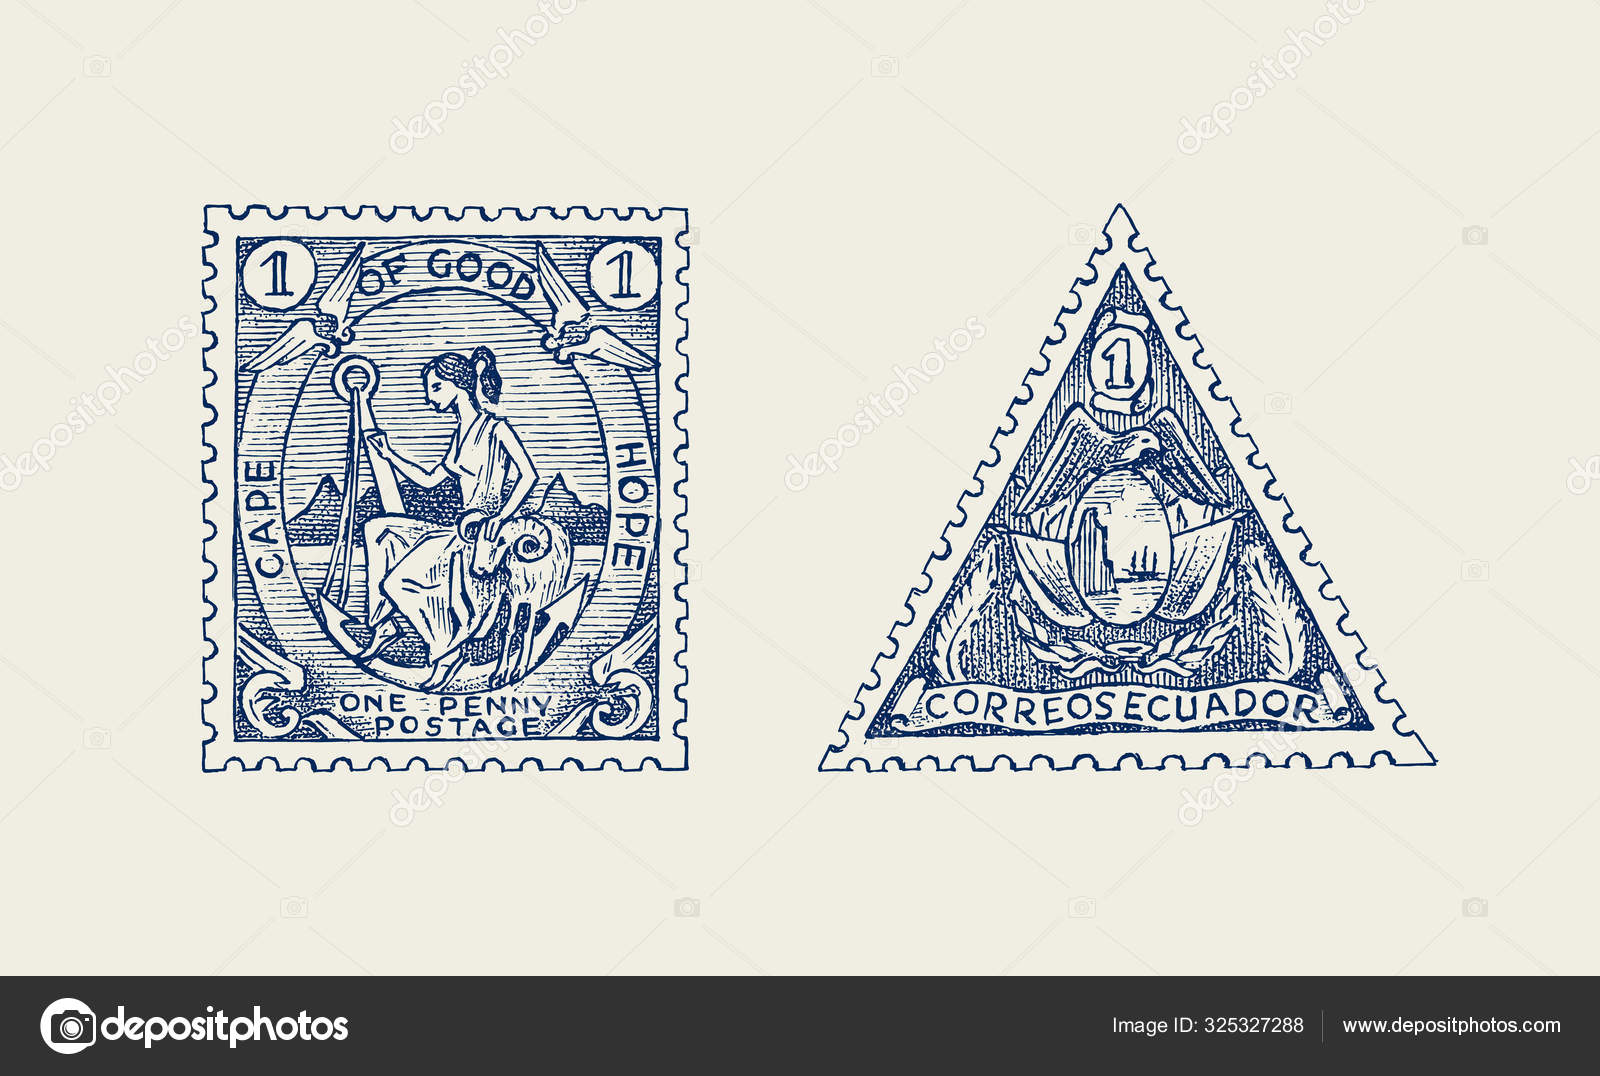 32,760 Postage Stamp Drawing Images, Stock Photos & Vectors | Shutterstock